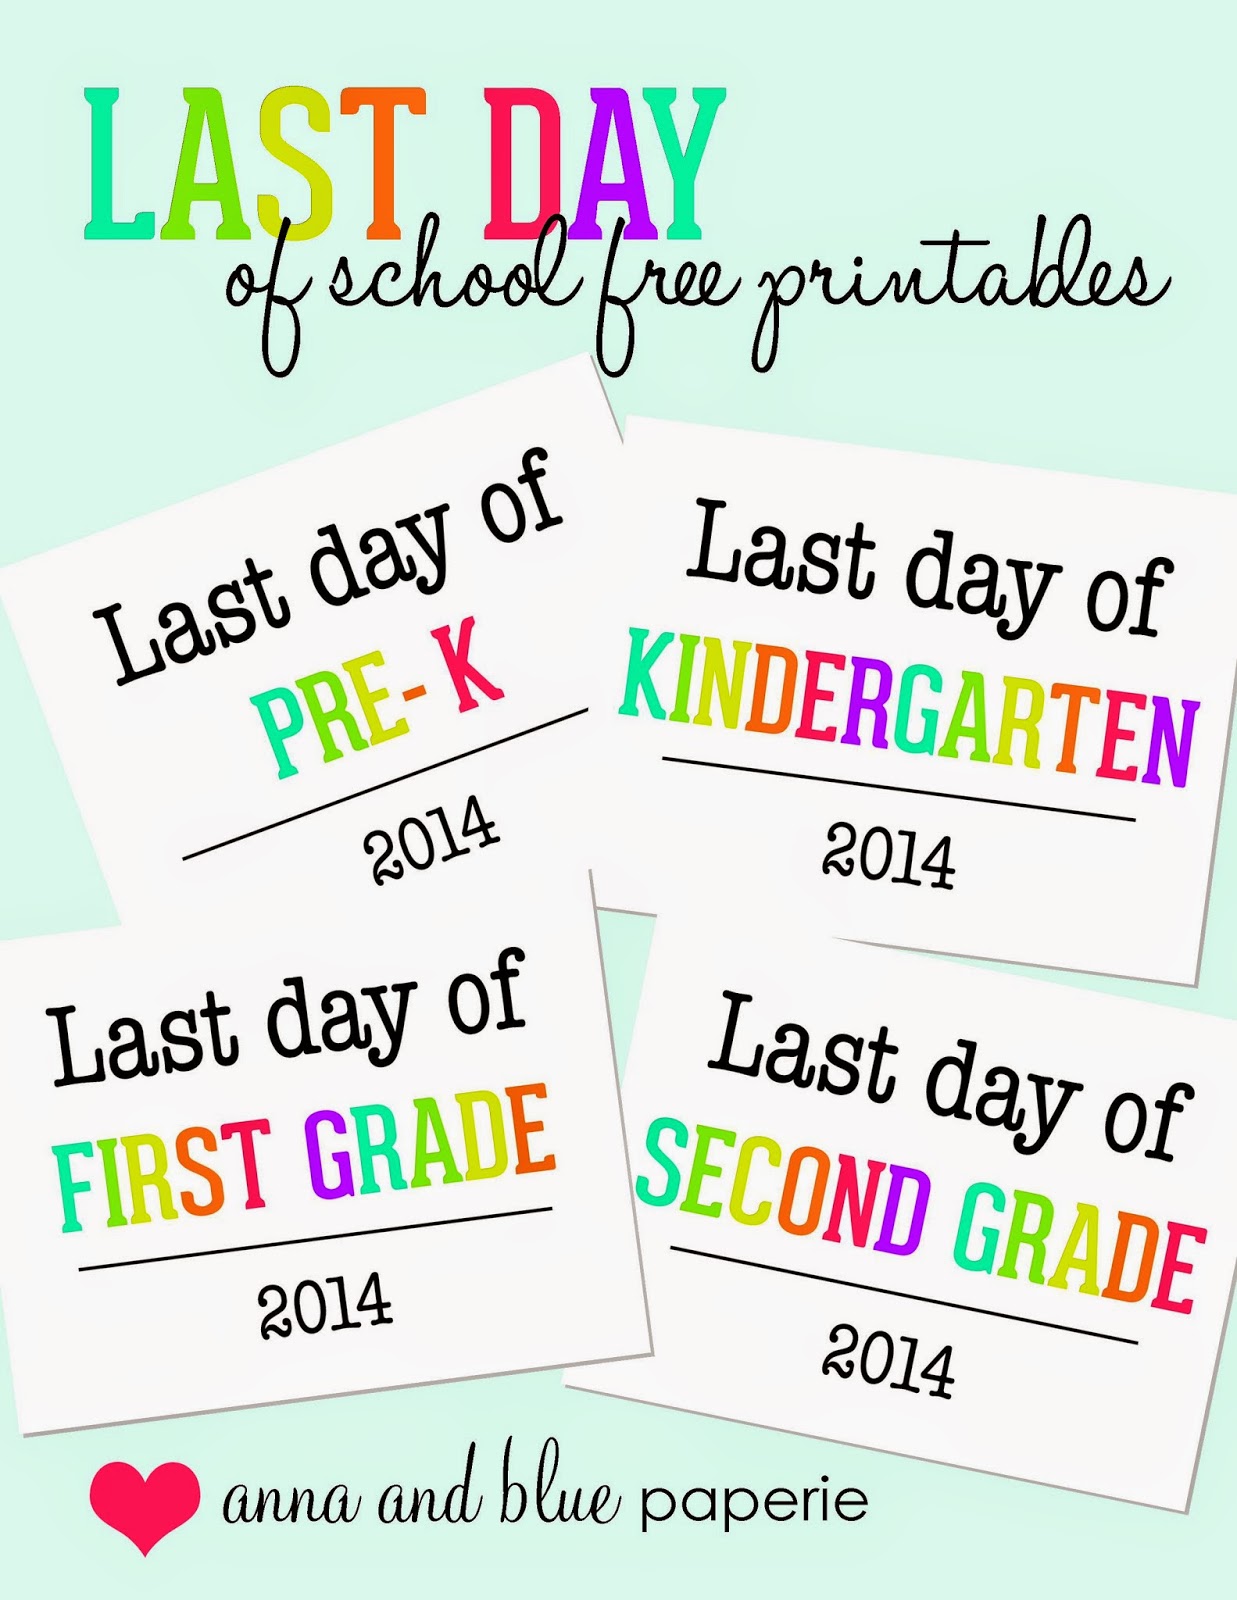 anna-and-blue-paperie-last-day-of-school-photo-op-free-printables